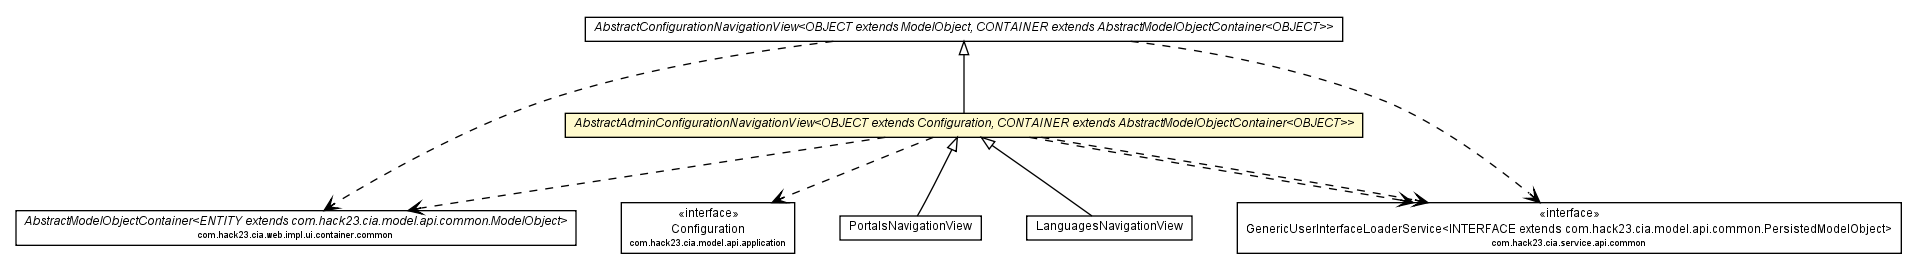 Package class diagram package AbstractAdminConfigurationNavigationView